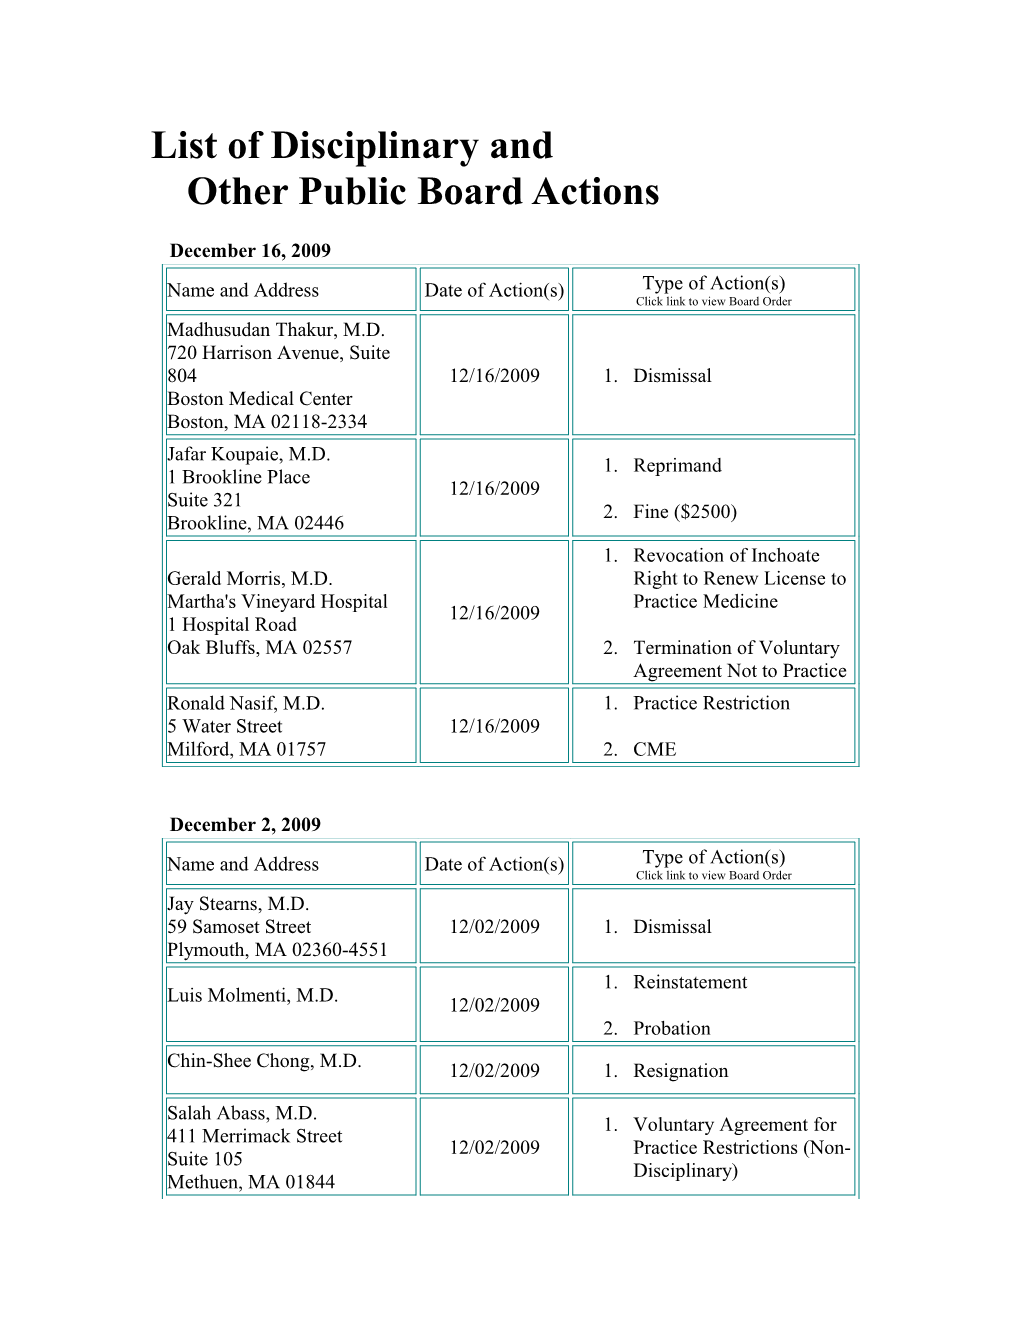 List of Disciplinary Andother Public Board Actions